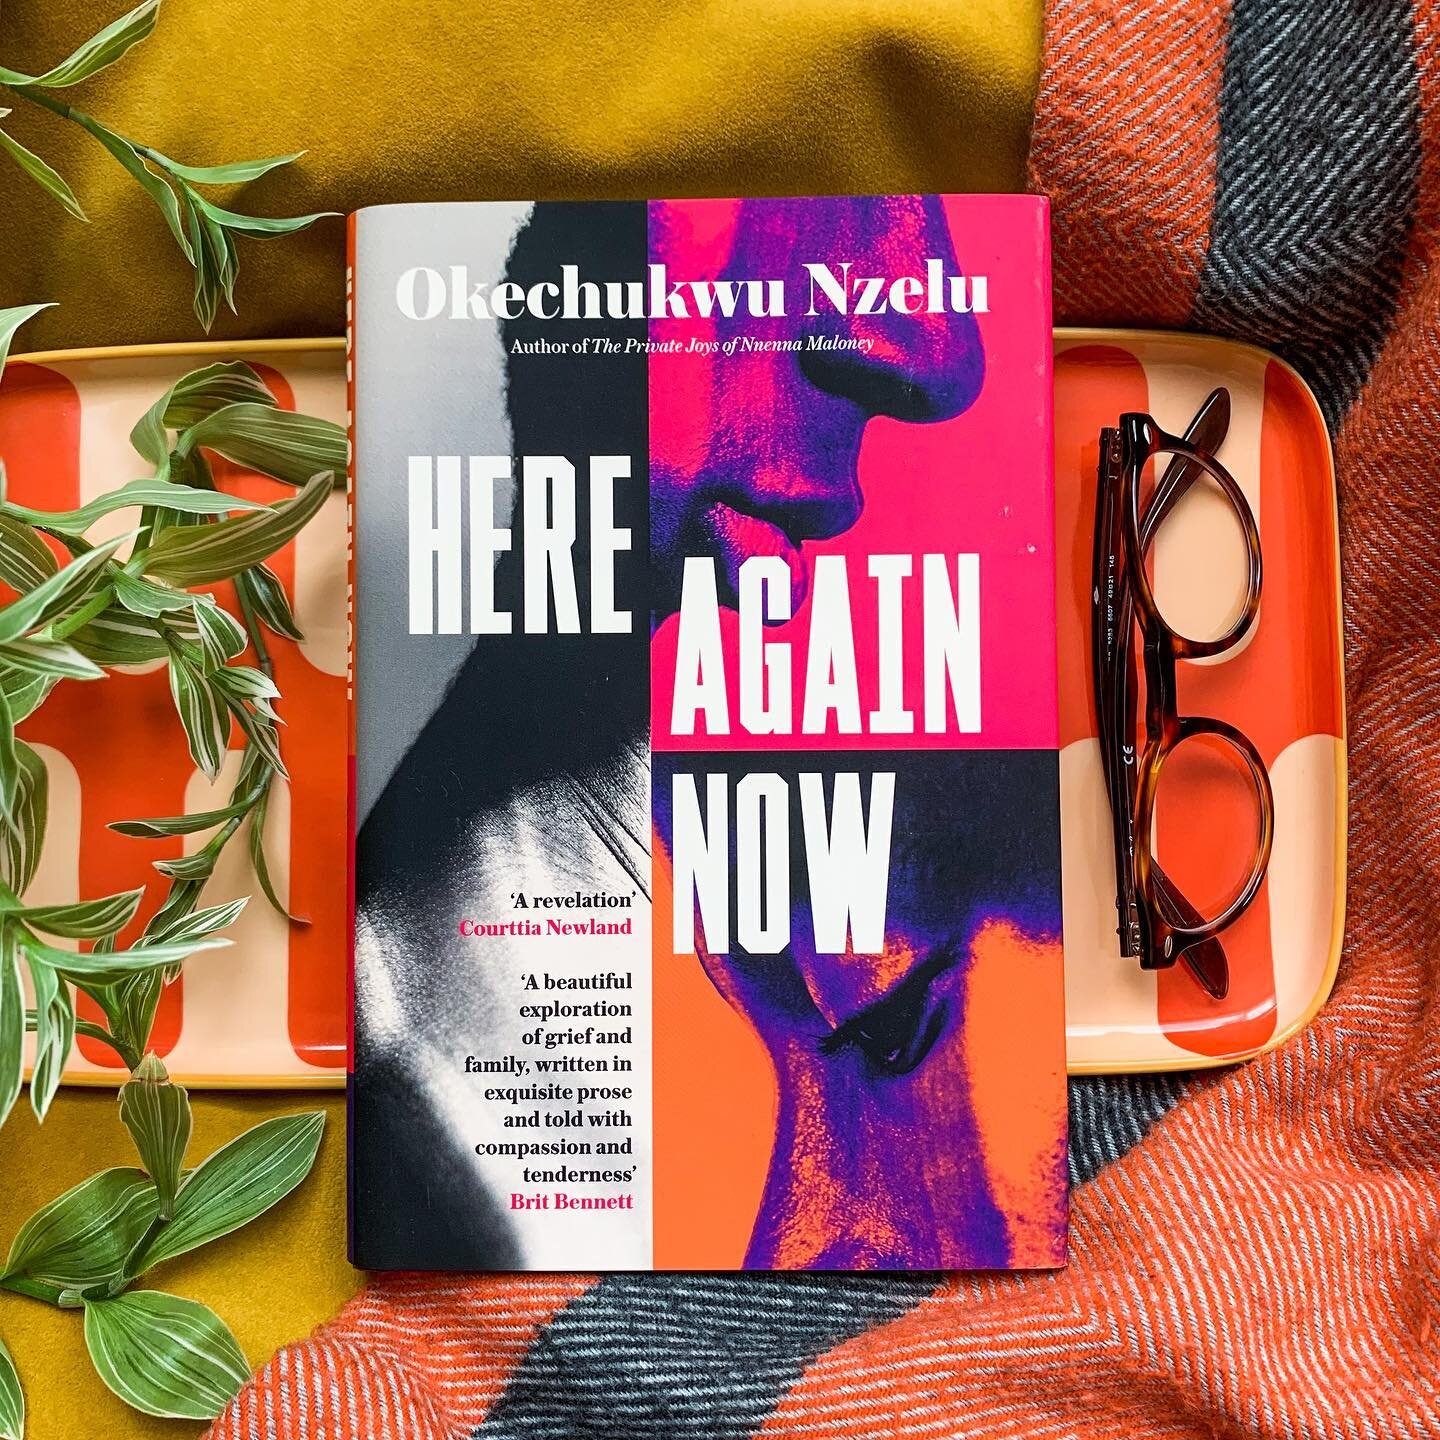 Enthusiasm is contagious 🥰⁠
⁠
When someone just has so much love for an author and/or book that it makes you want to get started reading immediately. Do you know that feeling? 💕⁠
⁠
Well, that's exactly how I feel about Here Again Now by Okechukwu N